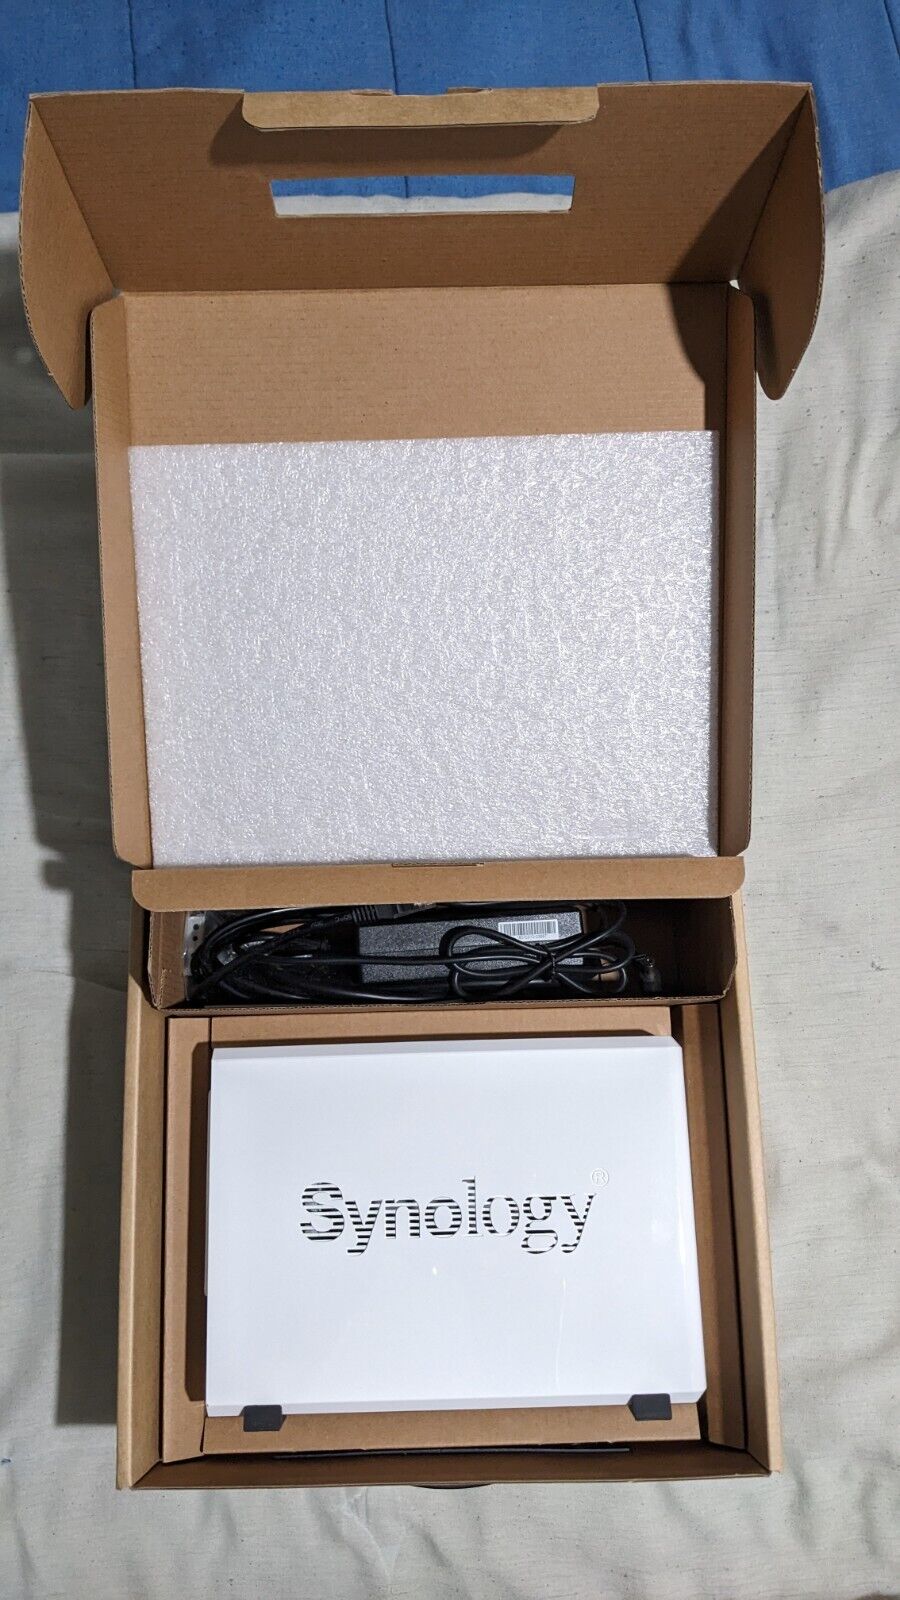 Synology DiskStation DS218J 2-Bay USB 3.1 NAS  with Original Packaging